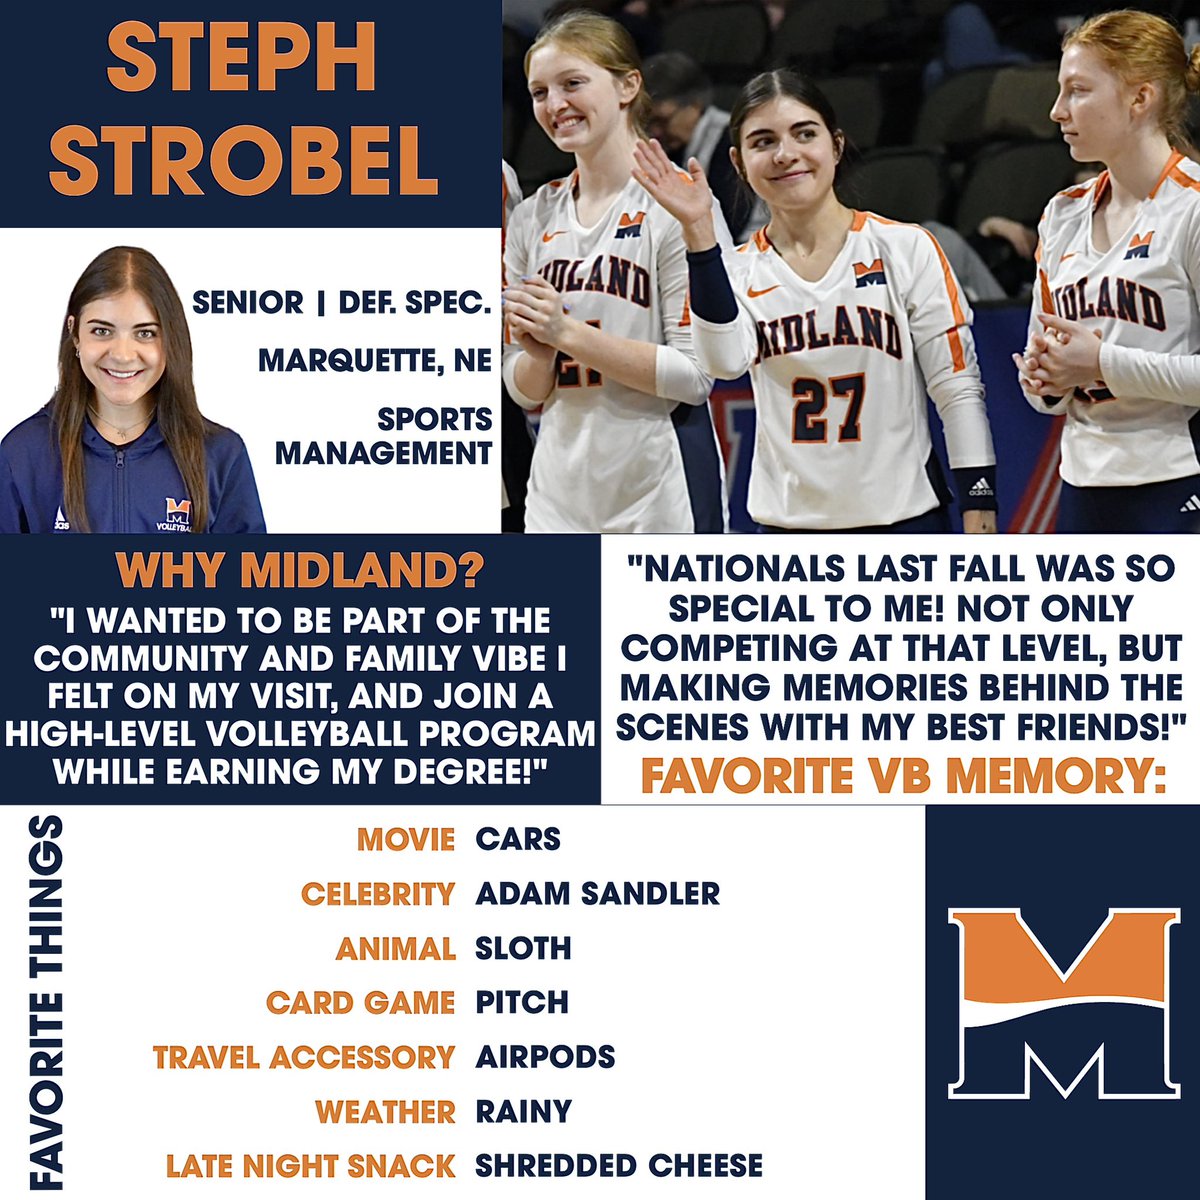 🌟 Warrior Spotlight 🌟 Get to know senior defensive specialist Steph Strobel, who was recently recognized as Midland University’s Ambassador of the Year for 2023-24. Steph is truly the epitome of servant leadership, which is one of our program’s core values. 🧡